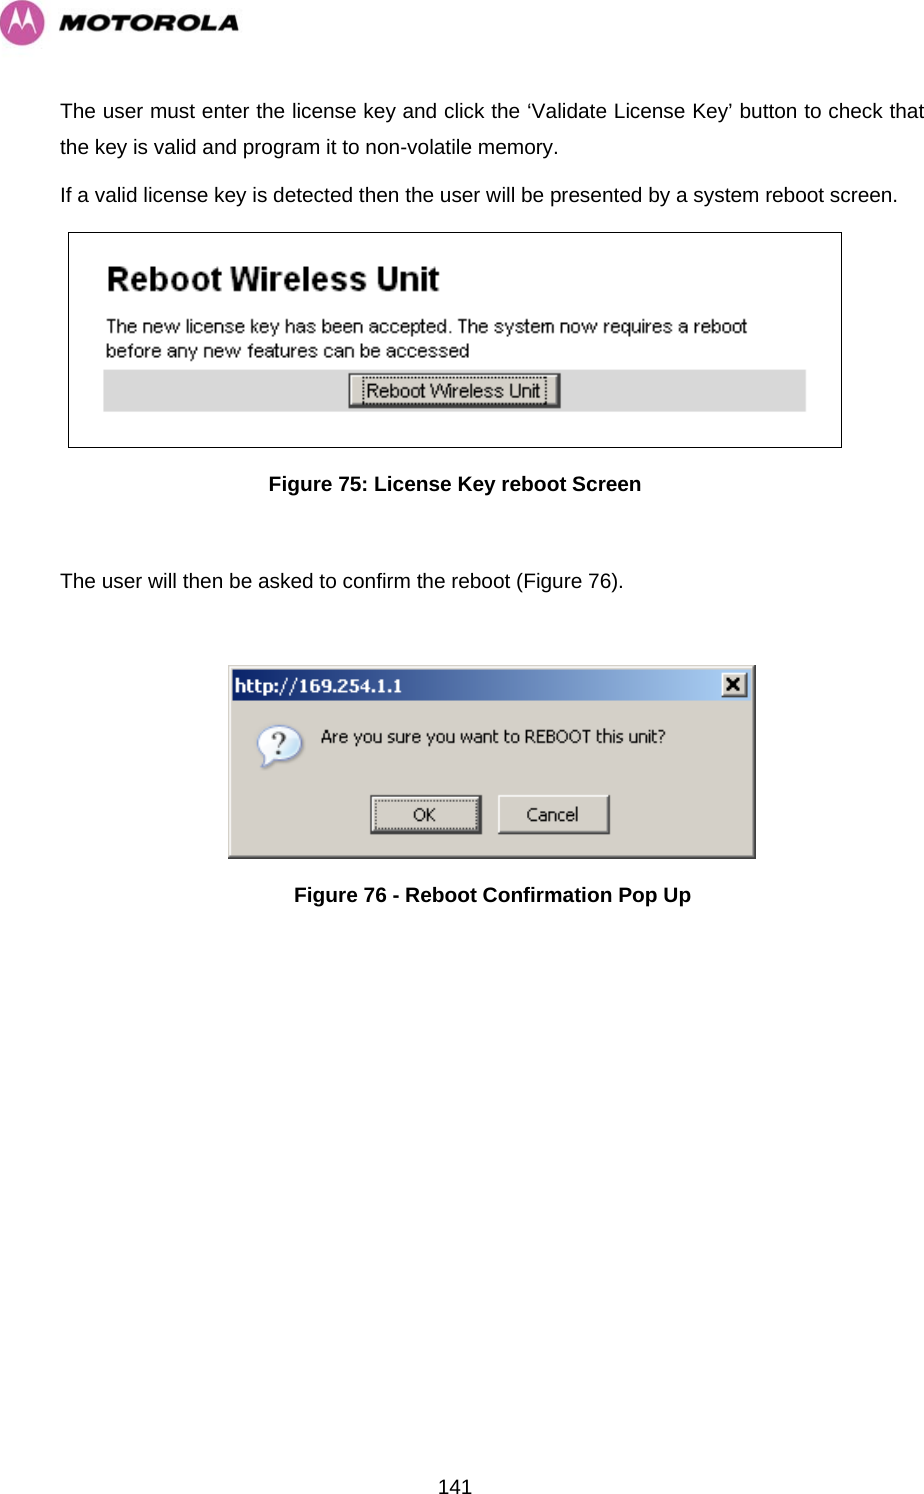   141The user must enter the license key and click the ‘Validate License Key’ button to check that the key is valid and program it to non-volatile memory. If a valid license key is detected then the user will be presented by a system reboot screen.  Figure 75: License Key reboot Screen  The user will then be asked to confirm the reboot (Figure 76).   Figure 76 - Reboot Confirmation Pop Up 